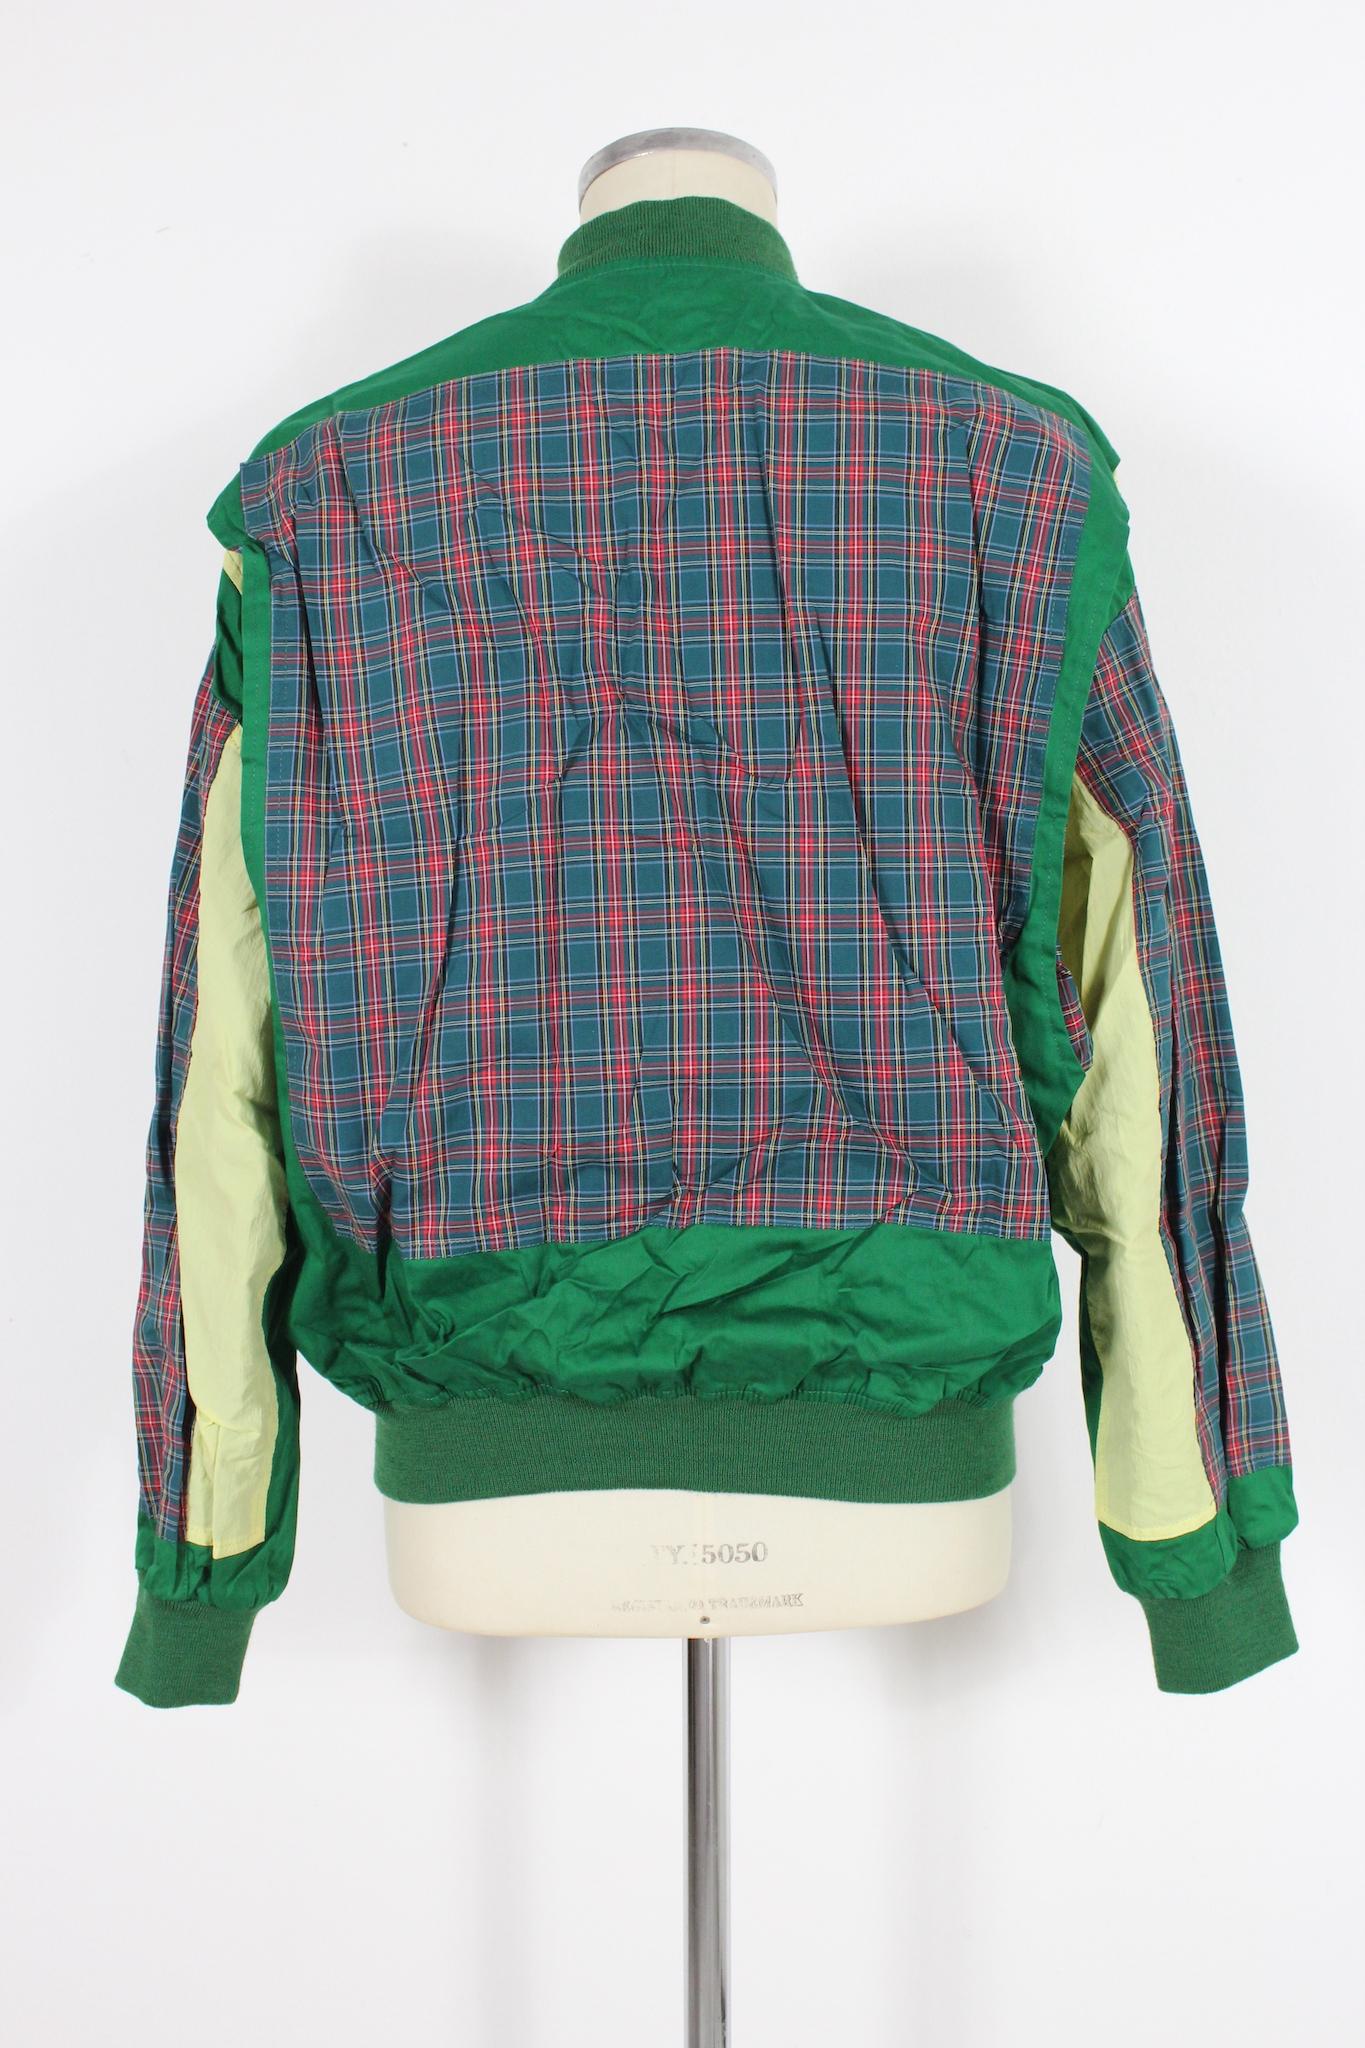 Faconable vintage 90s windbreaker jacket. Green and red color with checked pattern. Zip closure, double pocket on the front, cuffs and collar in elastic fabric. 100% cotton fabric. Made in France.

Size: 6 Fr XL

Shoulder: 55 cm
Bust/Chest: 64